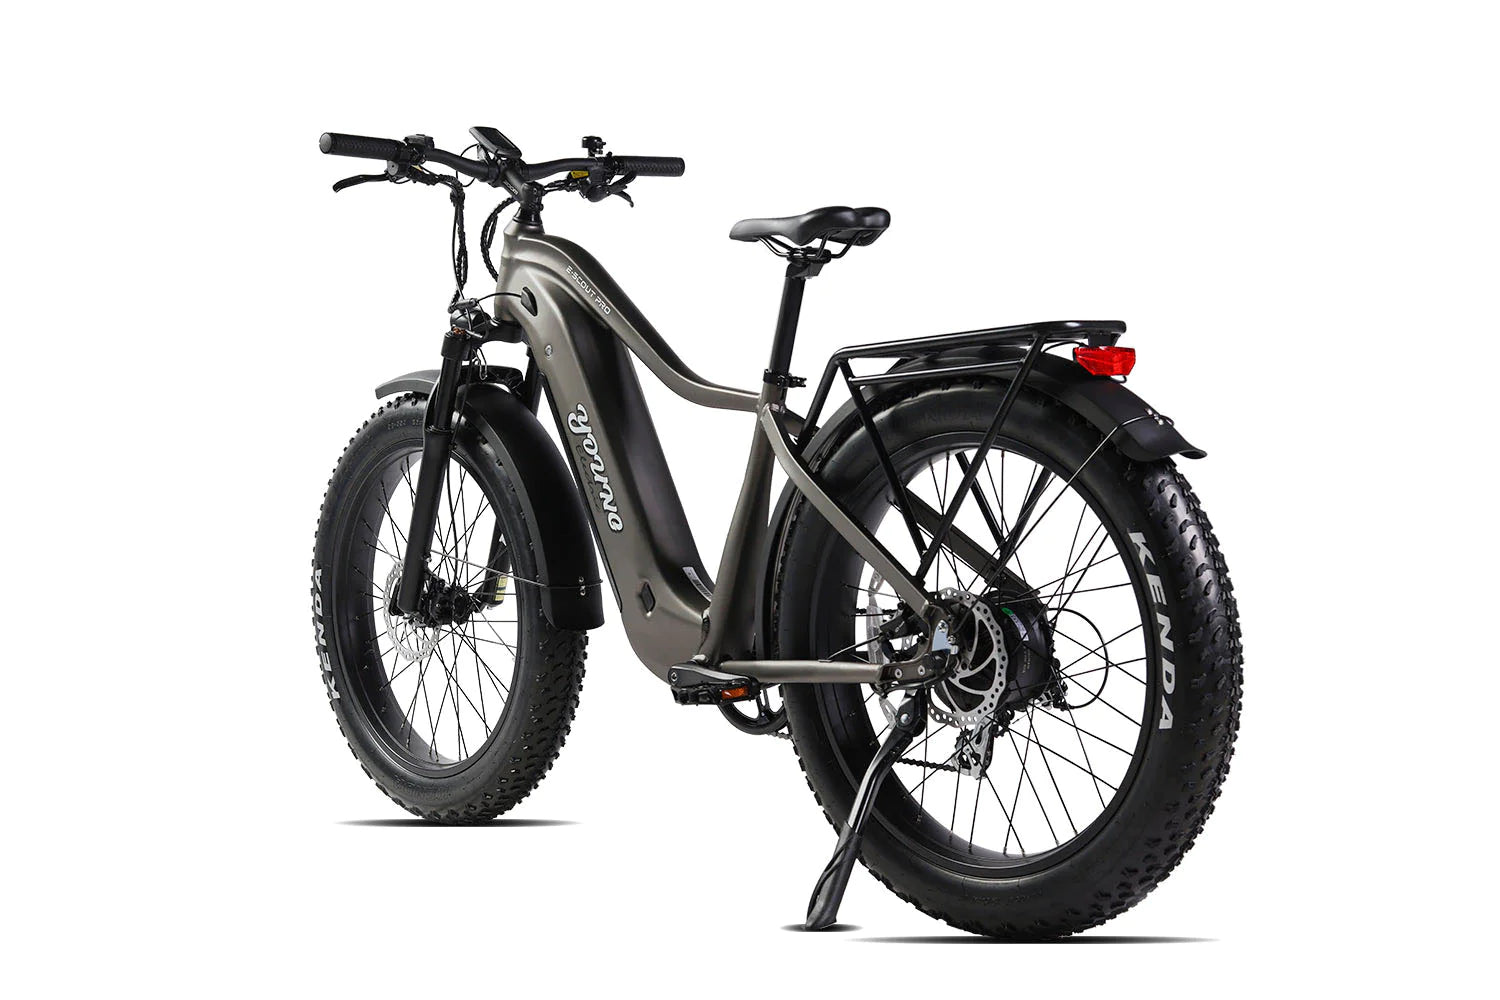 Young Electric E-Scout Pro | 750W Long Range Hunting eBike | 960Wh LG Battery | Up to 80 Miles, 28 MPH | 26’’ All-terrain eBike